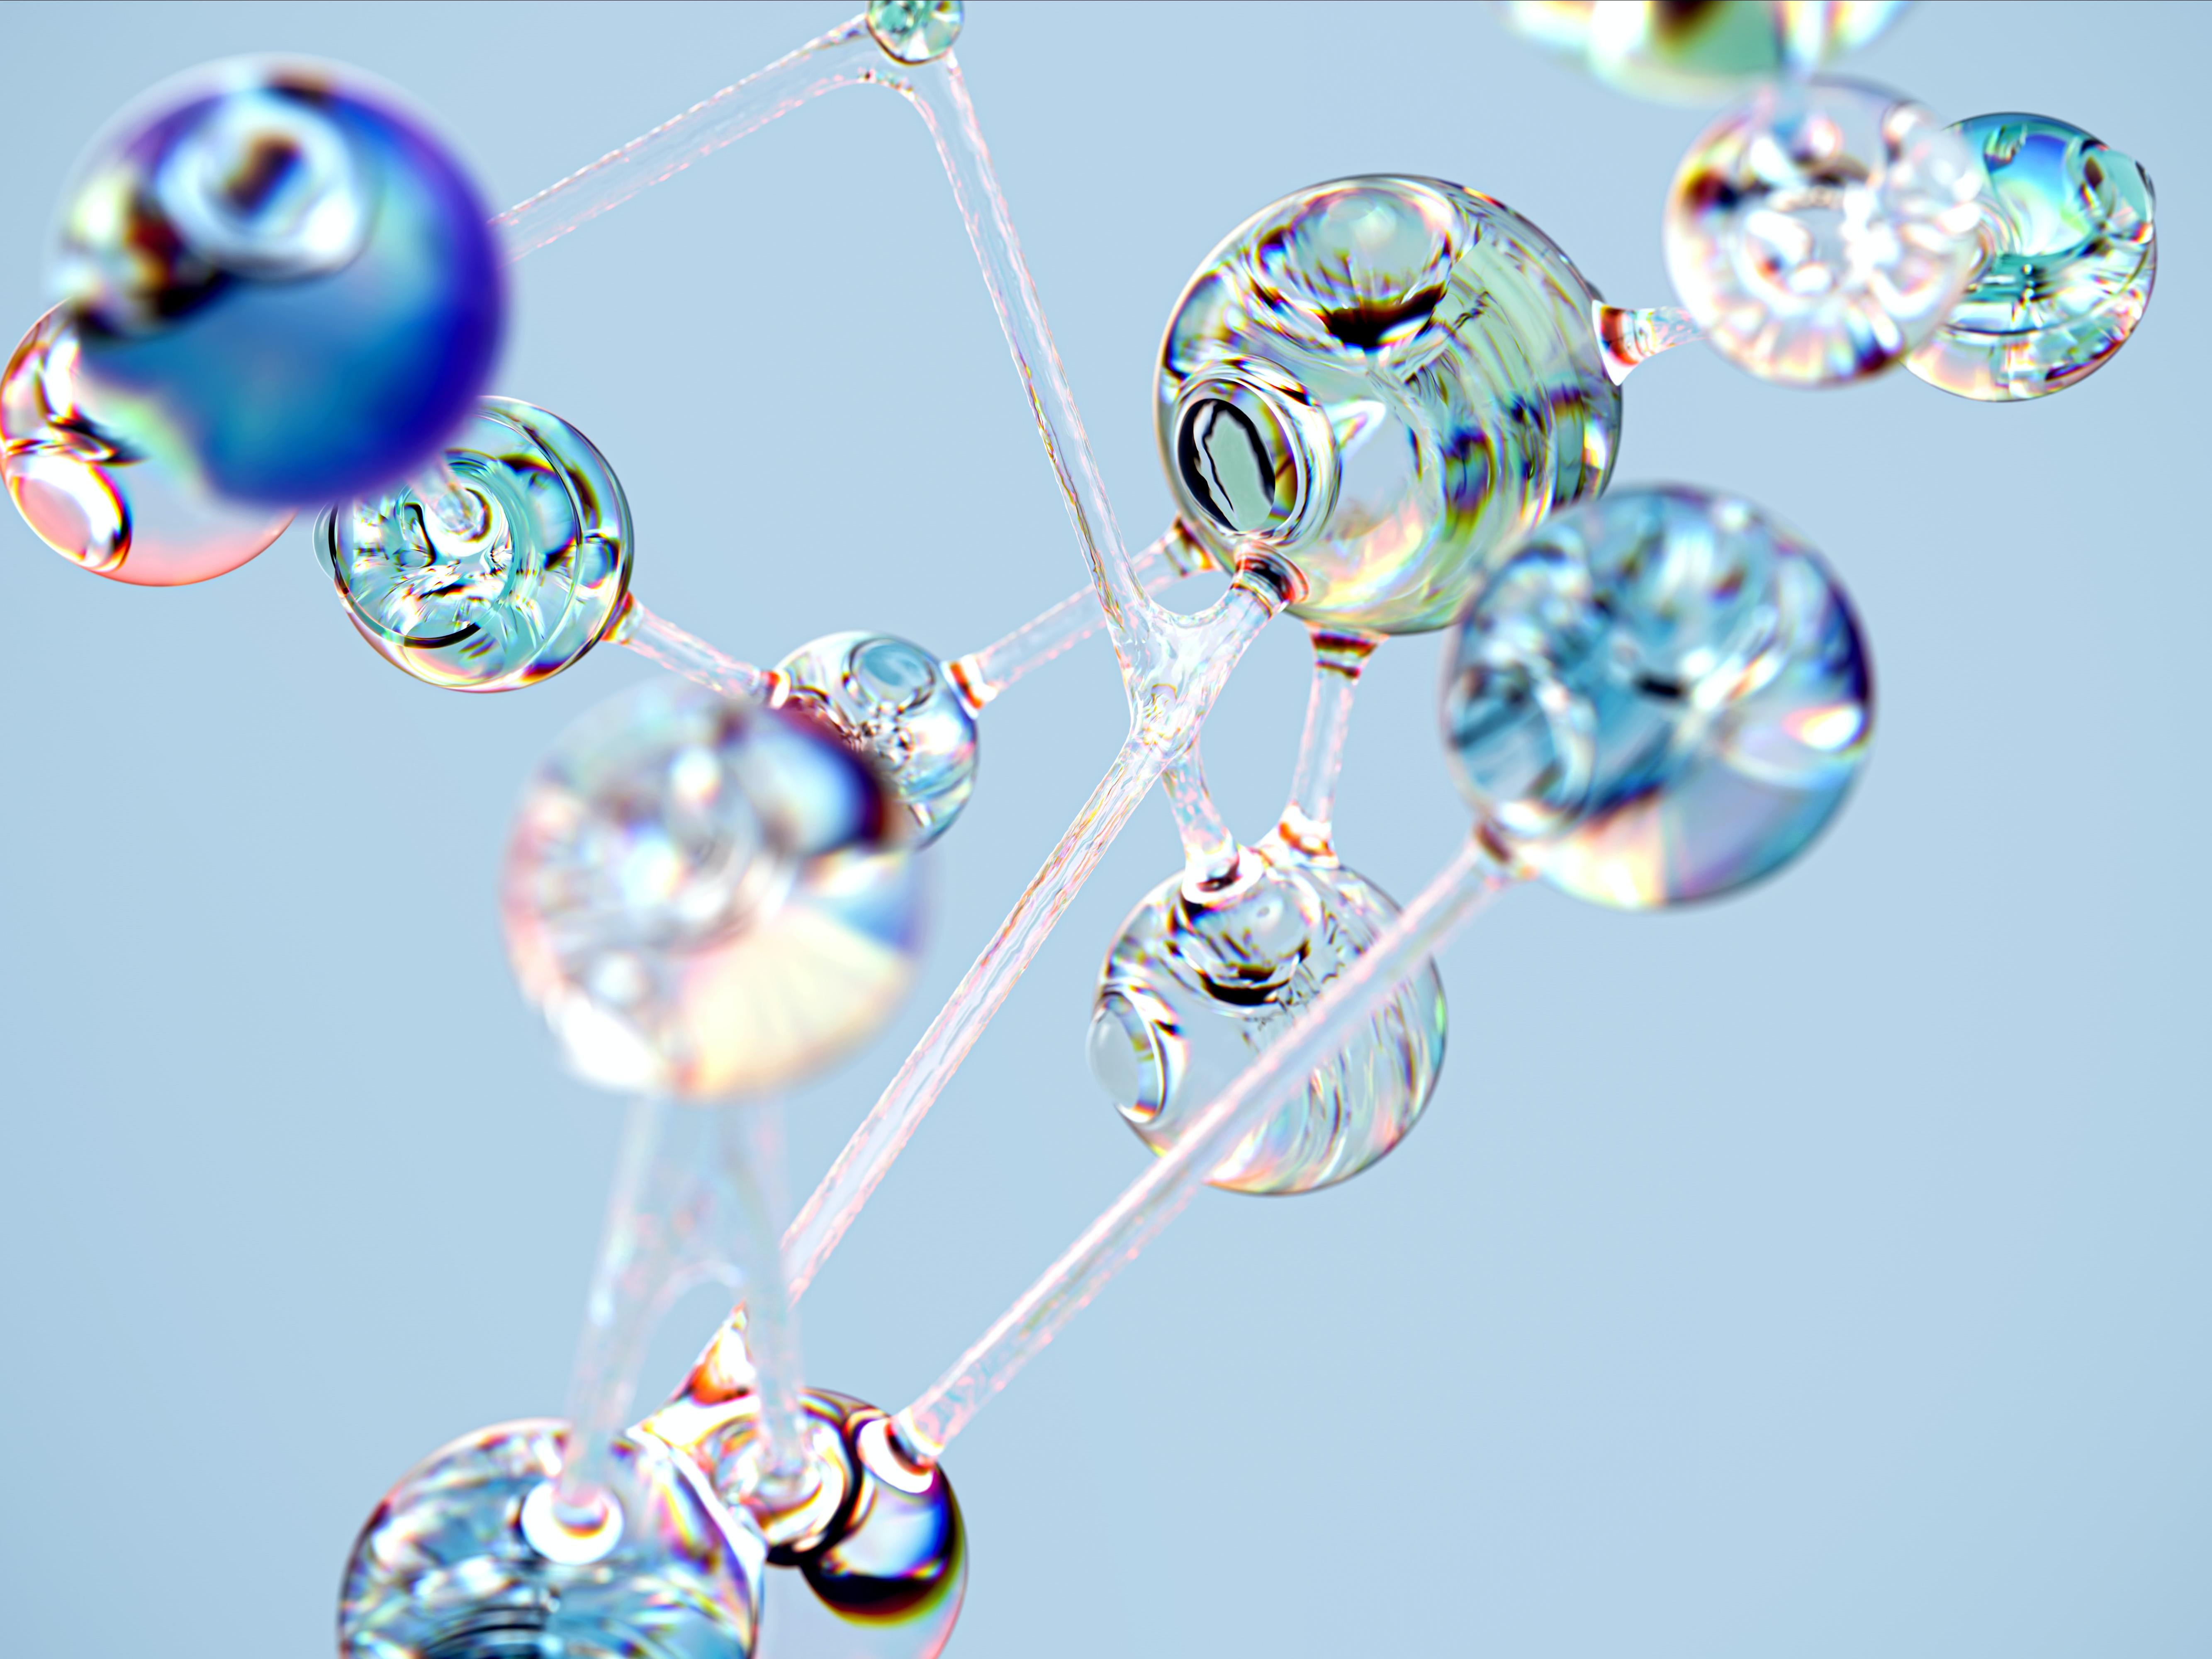 glass ornaments forming the shape of a molecule